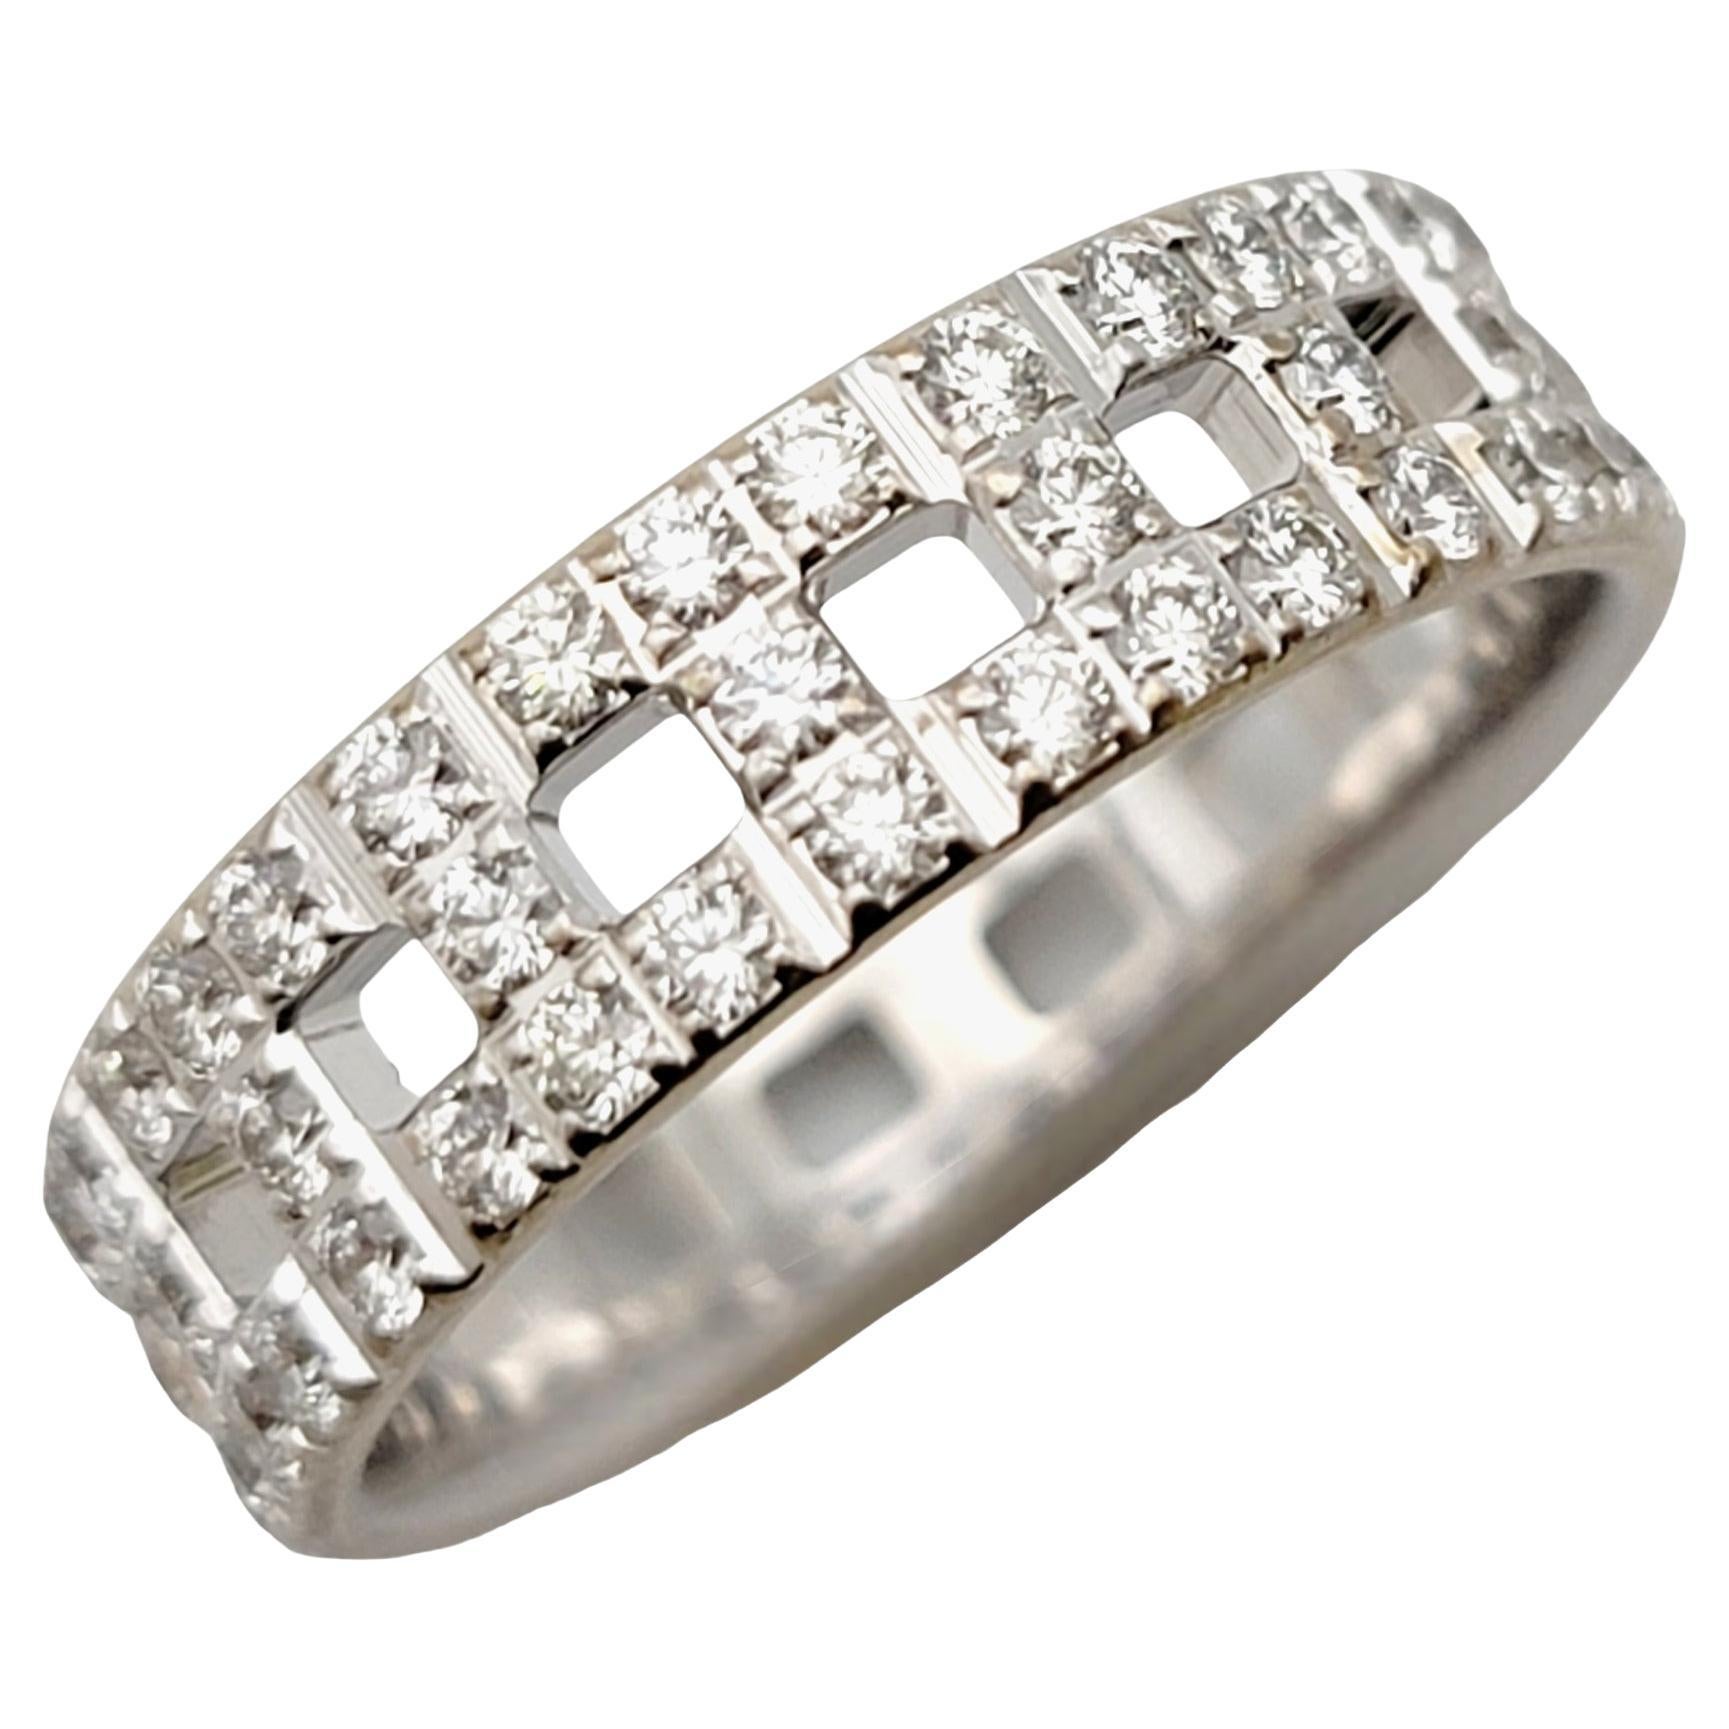 Tiffany & Co. Tiffany T True Wide Band Ring with Diamonds in 18 Karat White Gold